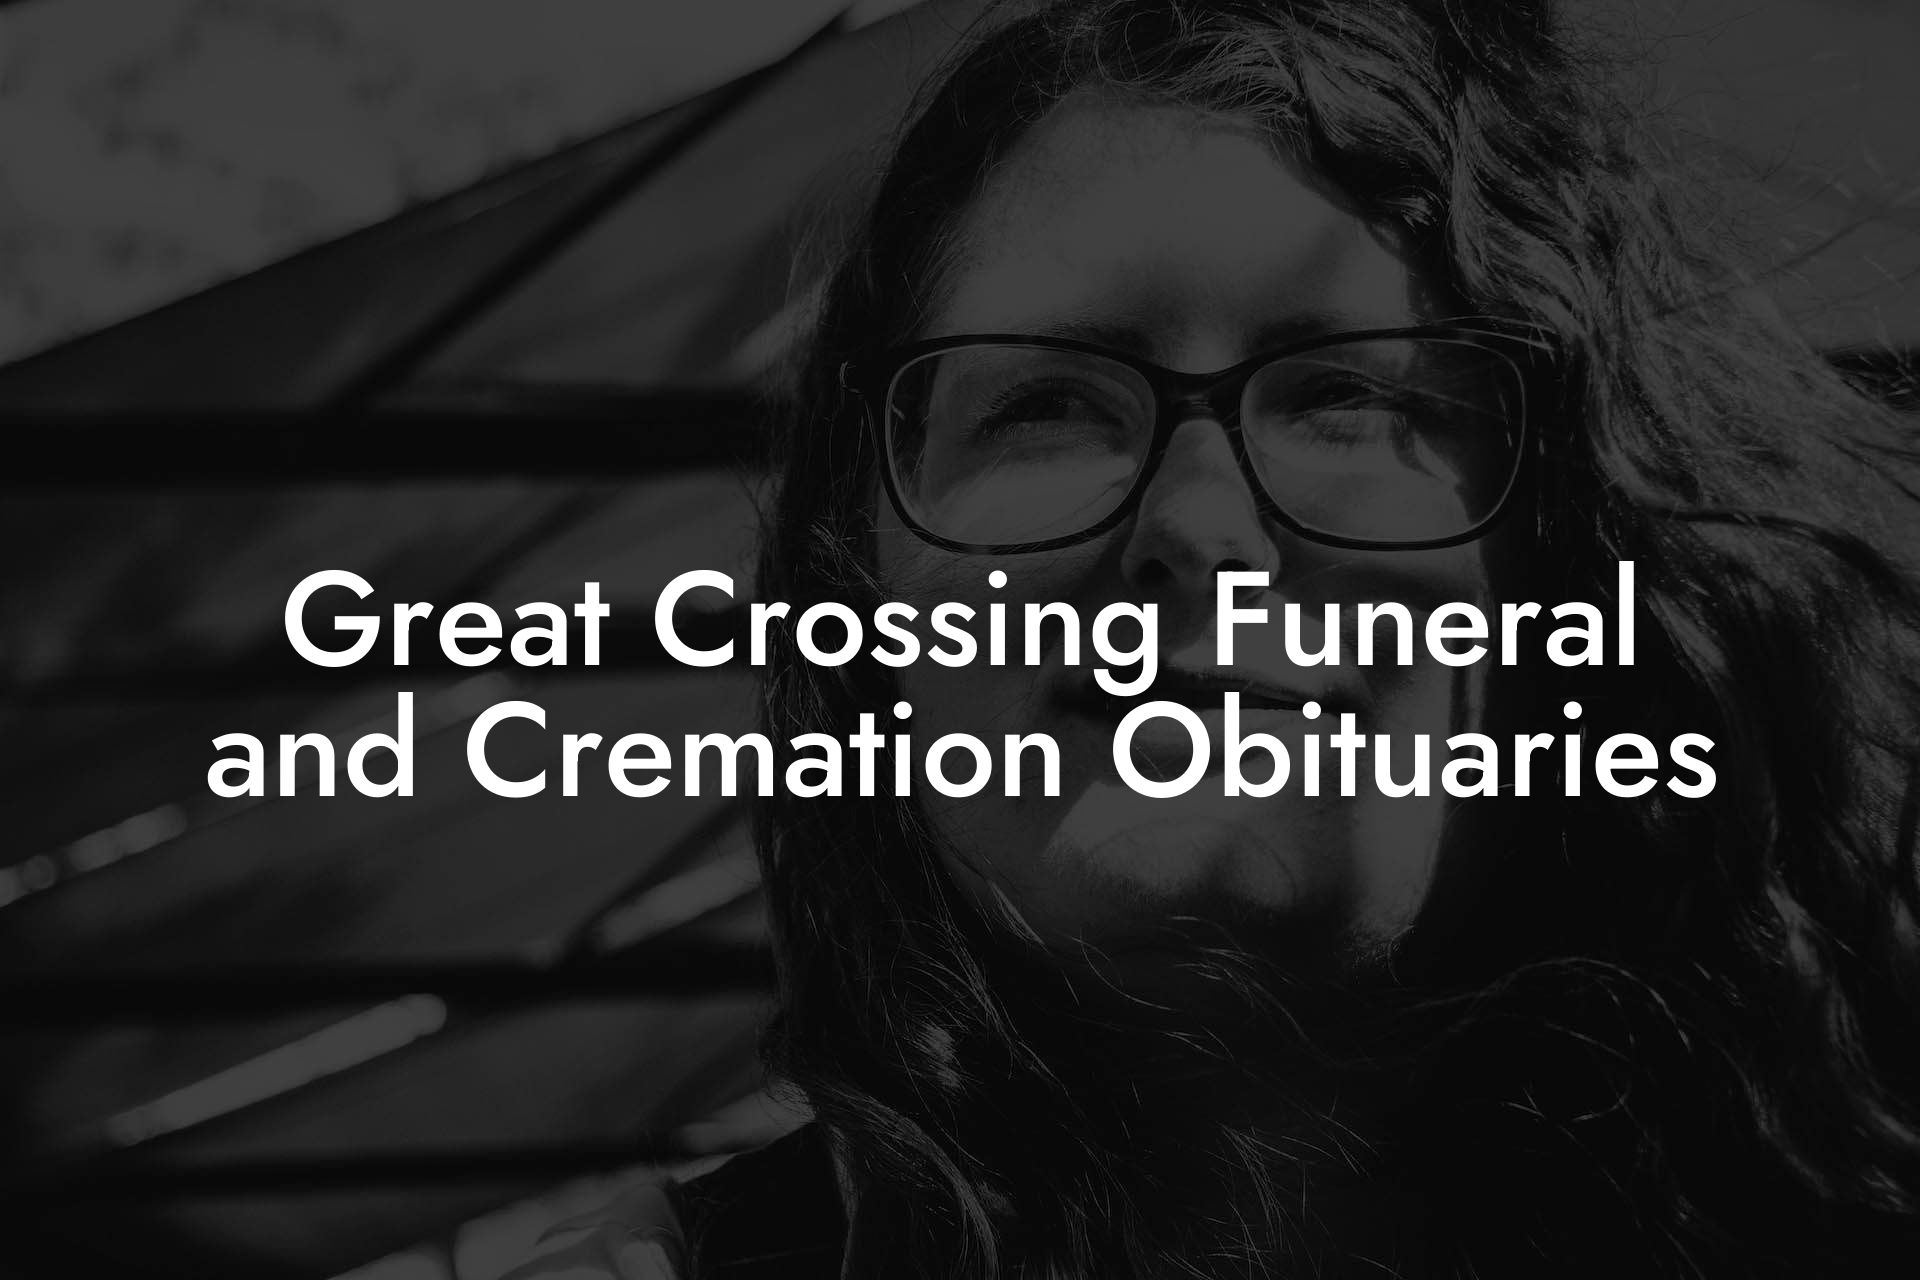 Great Crossing Funeral and Cremation Obituaries